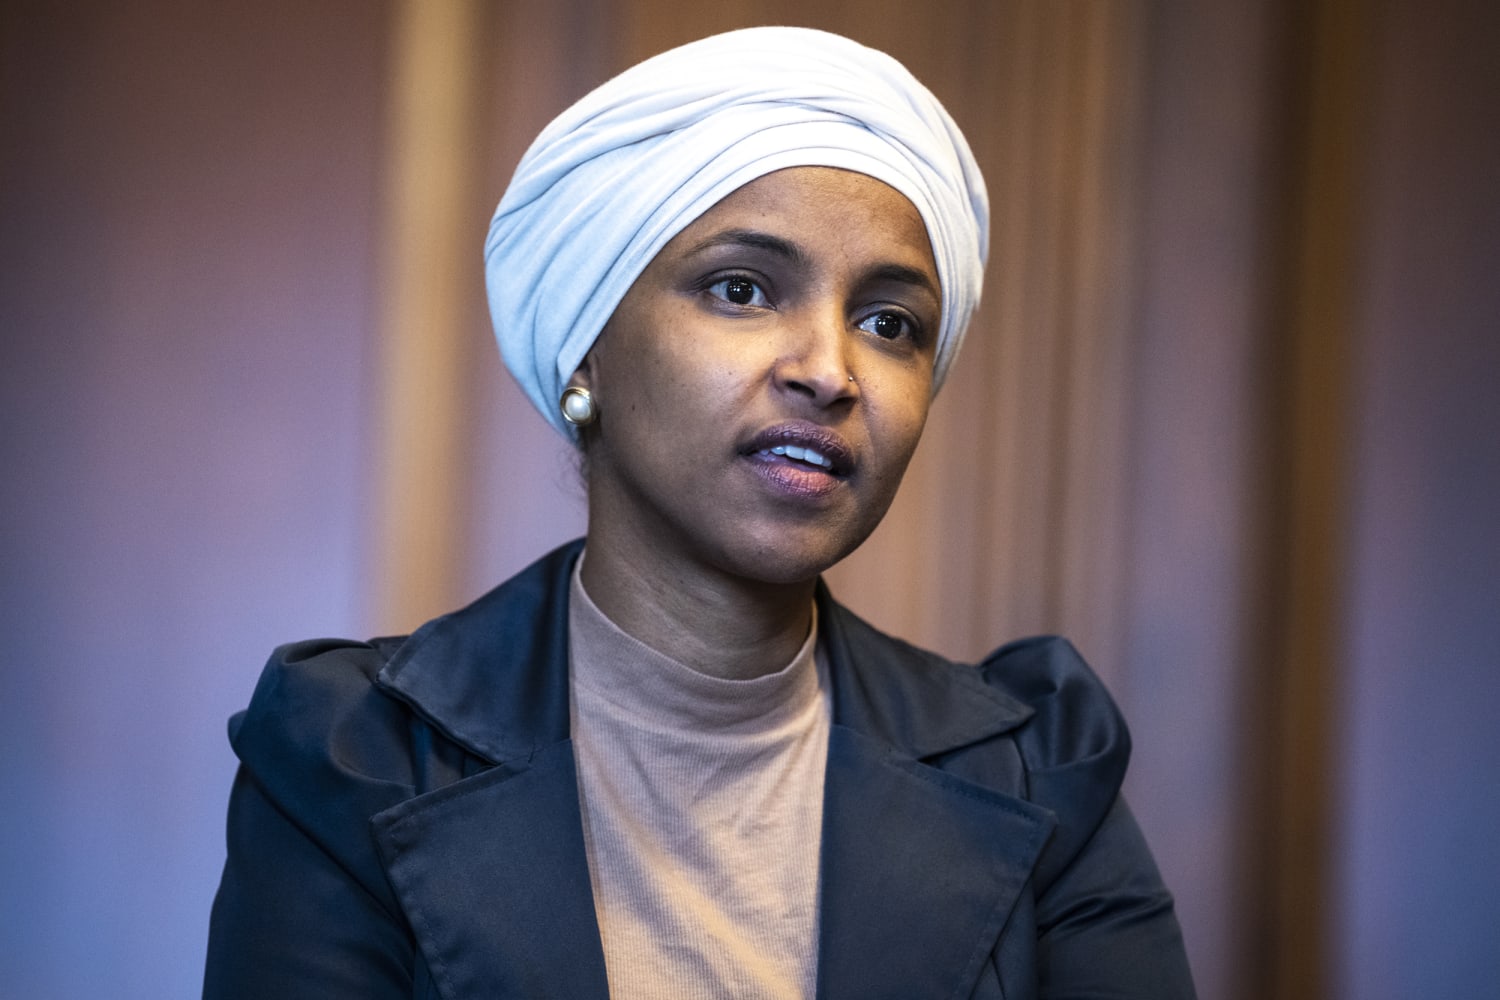 Florida man pleads guilty to threatening Rep. Omar